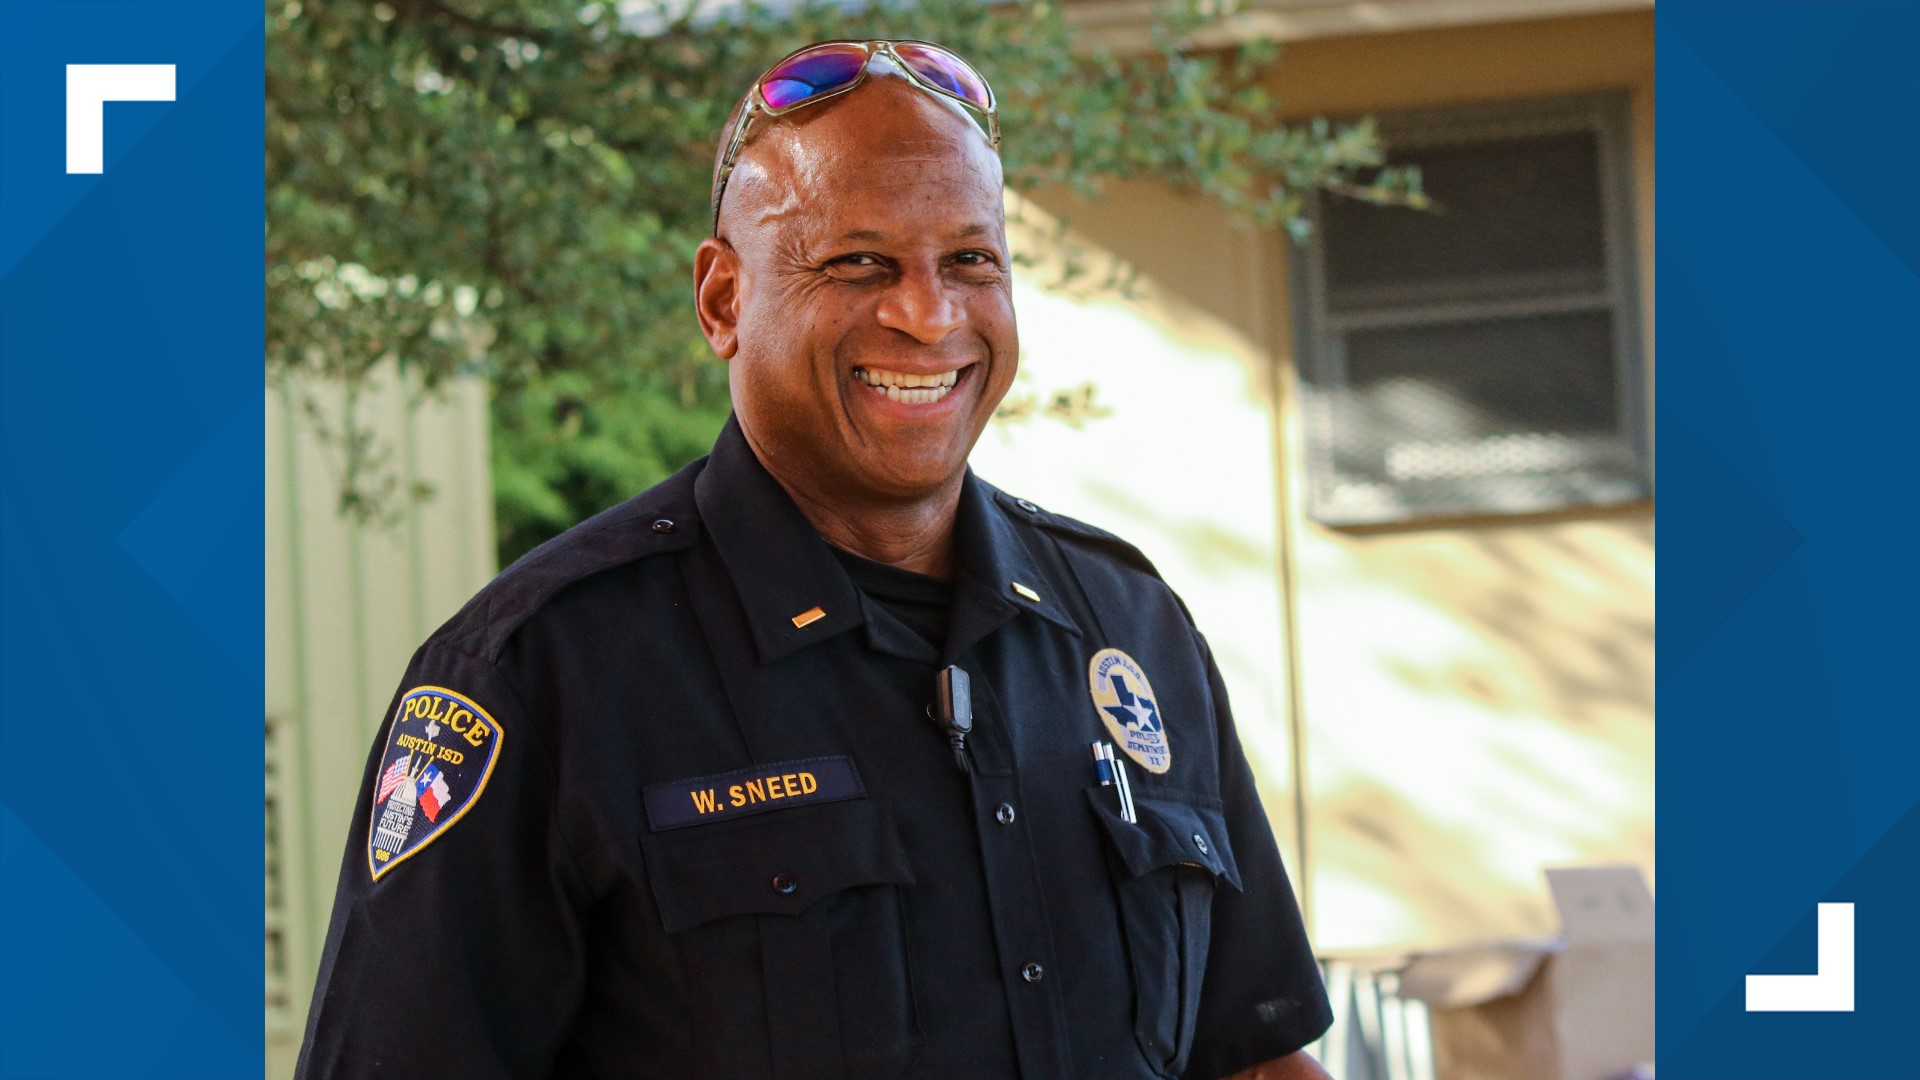 Wayne Sneed will step into the role on Aug. 1 to lead 76 officers in the department.